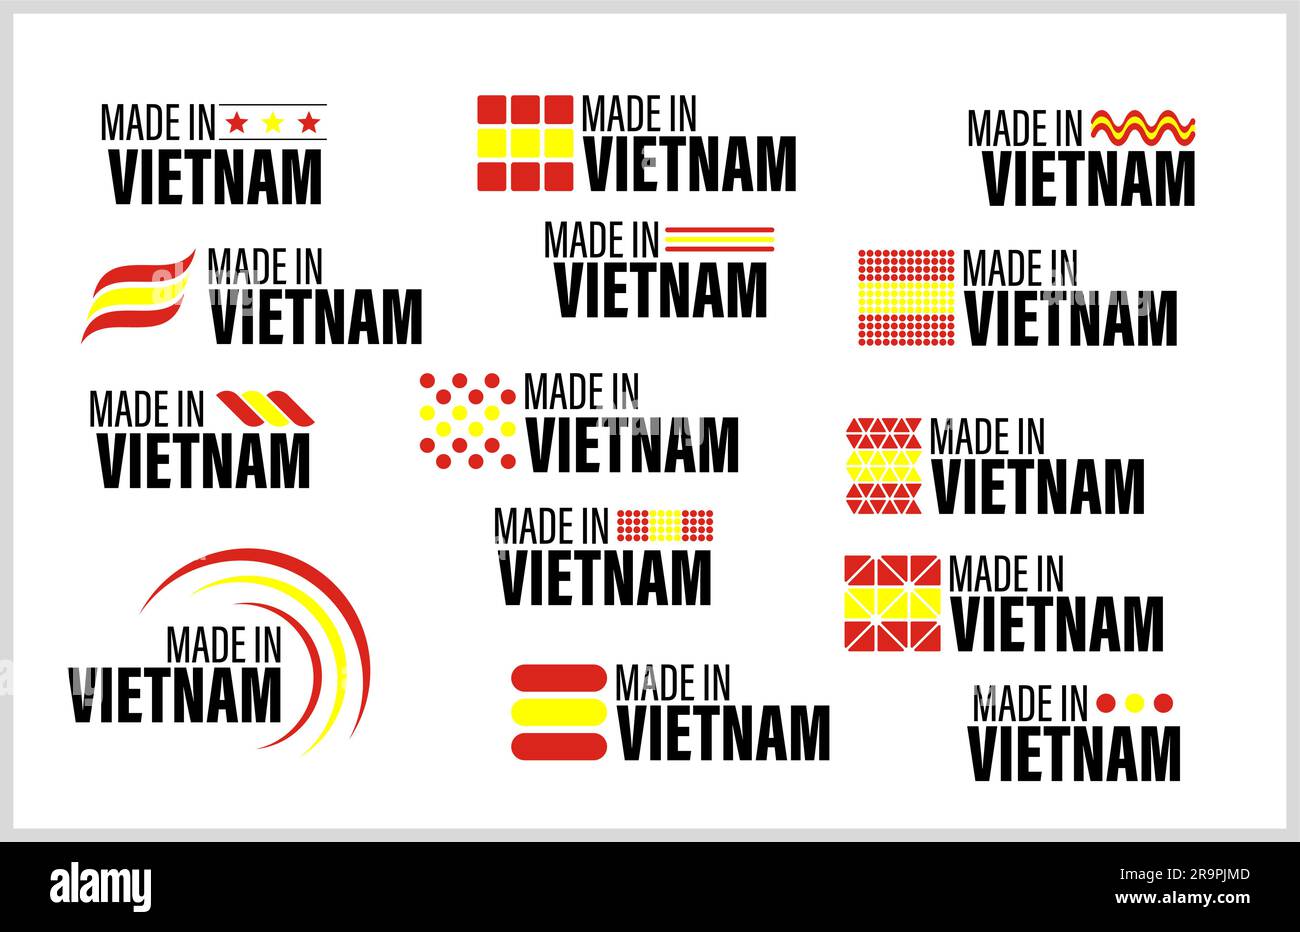 Made in Vietnam graphic and label set. Element of impact for the use you want to make of it. Stock Vector